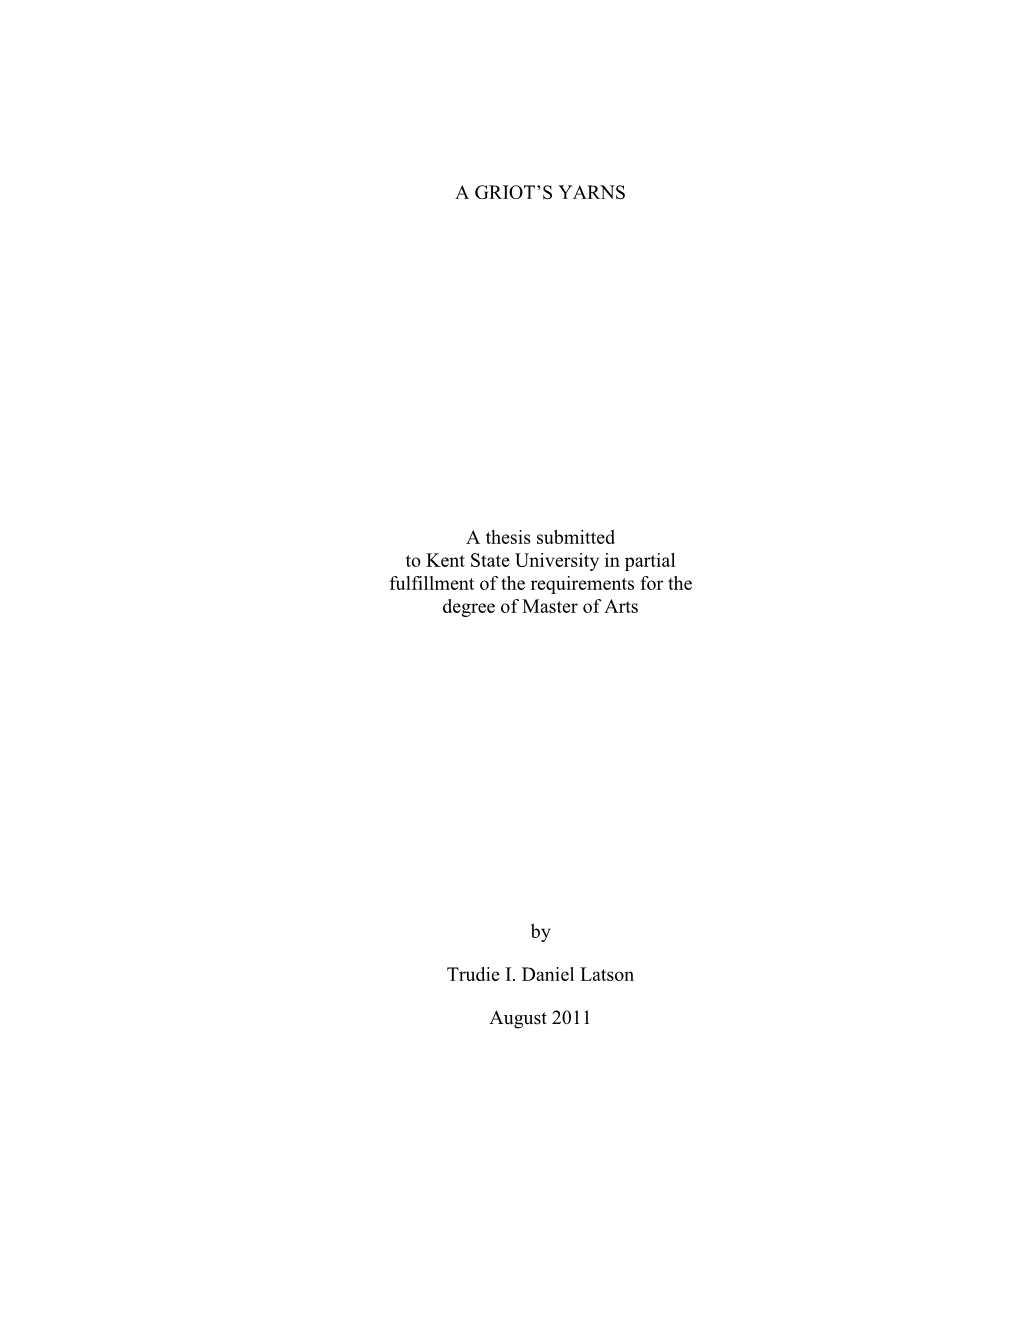 A GRIOT‟S YARNS a Thesis Submitted to Kent State University In